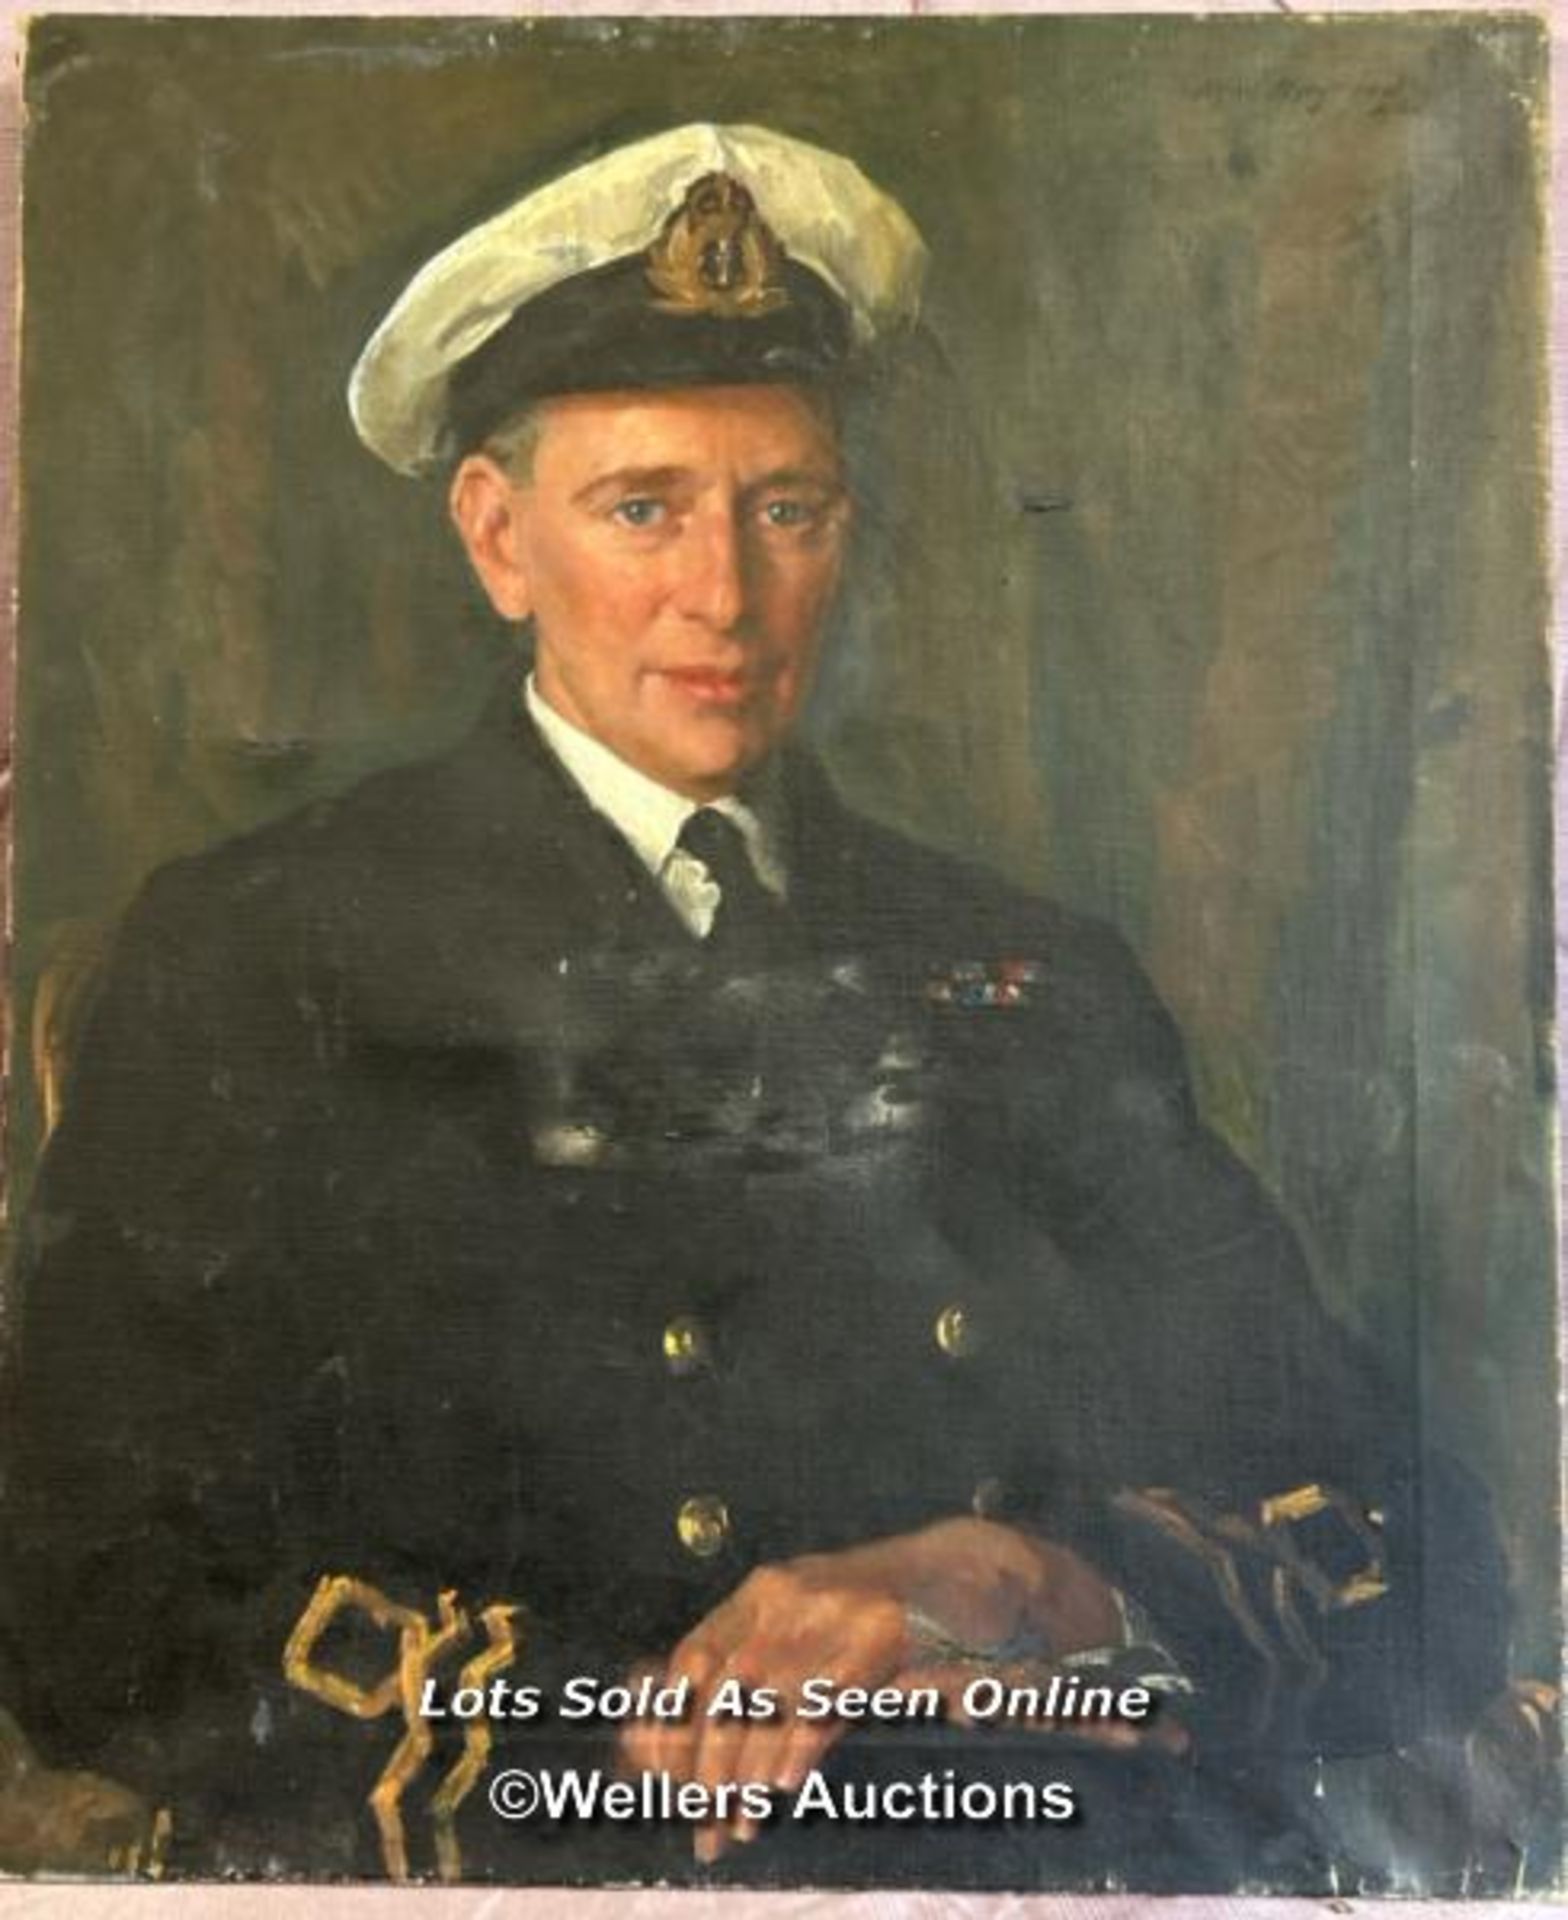 OIL ON CANVAS DEPICTING A LIEUTENANT IN THE ROYAL NAVY DATED 1932, 63 X 76CM